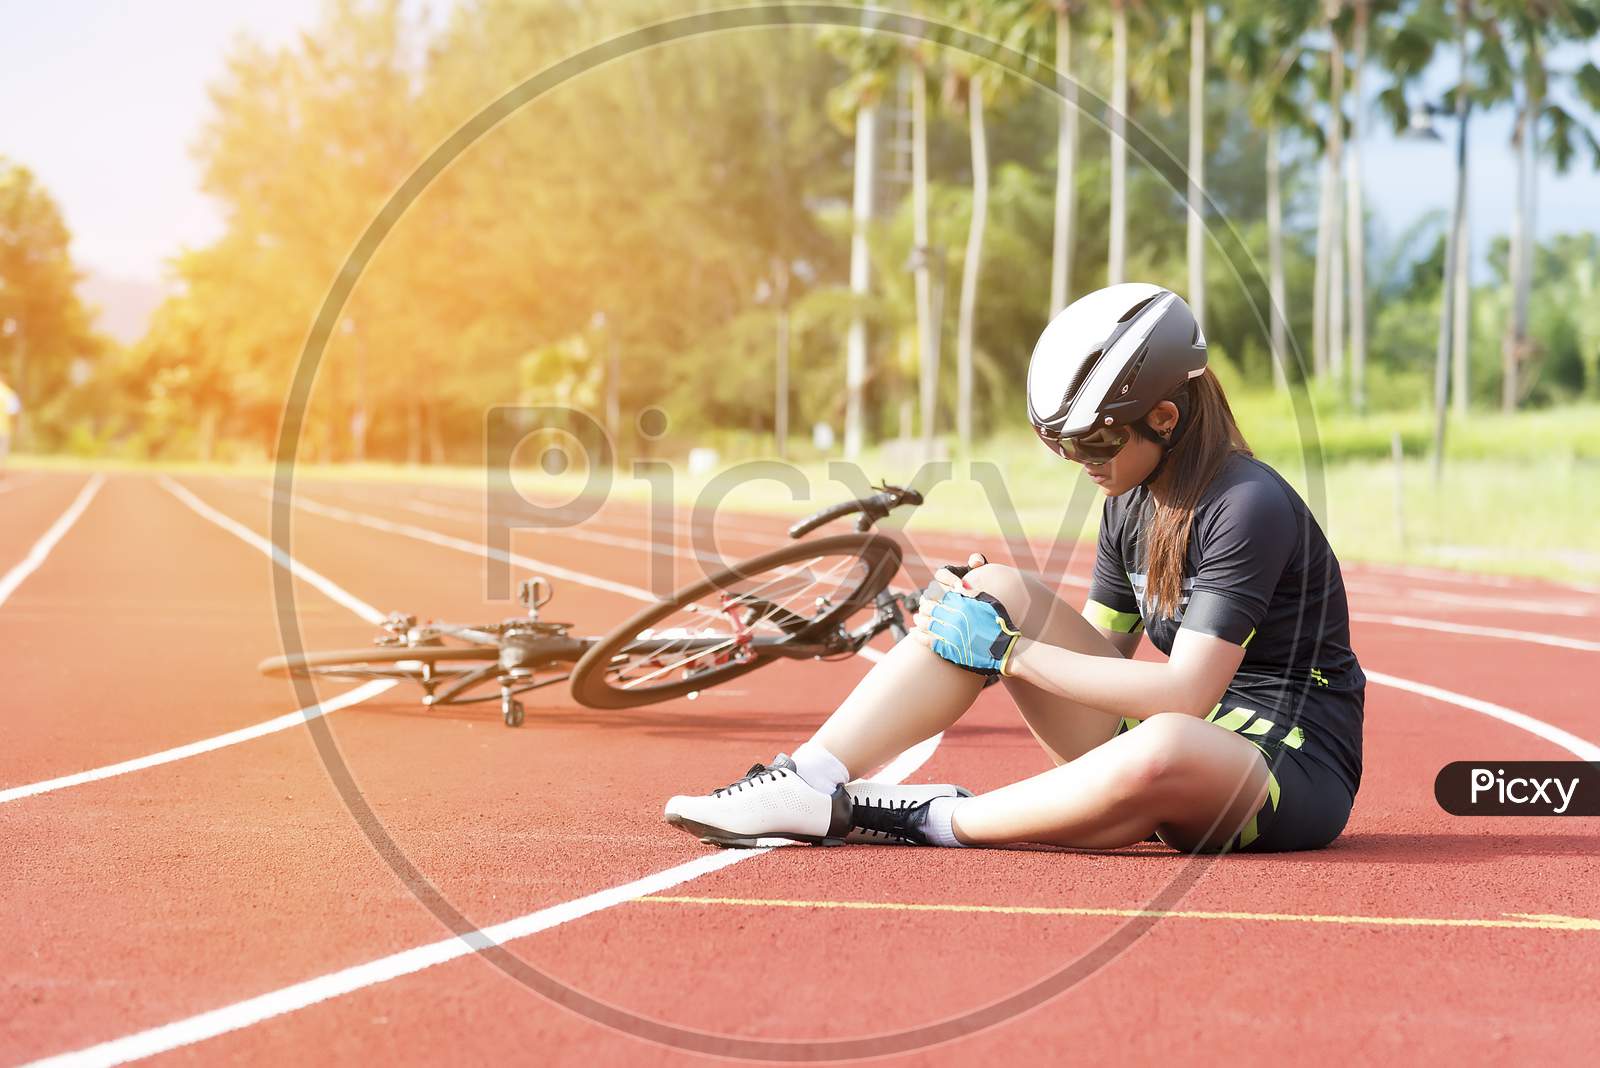 Girl Has Sport Accident Injury At Her Knee From Bicycle, Sport And Accident Concept